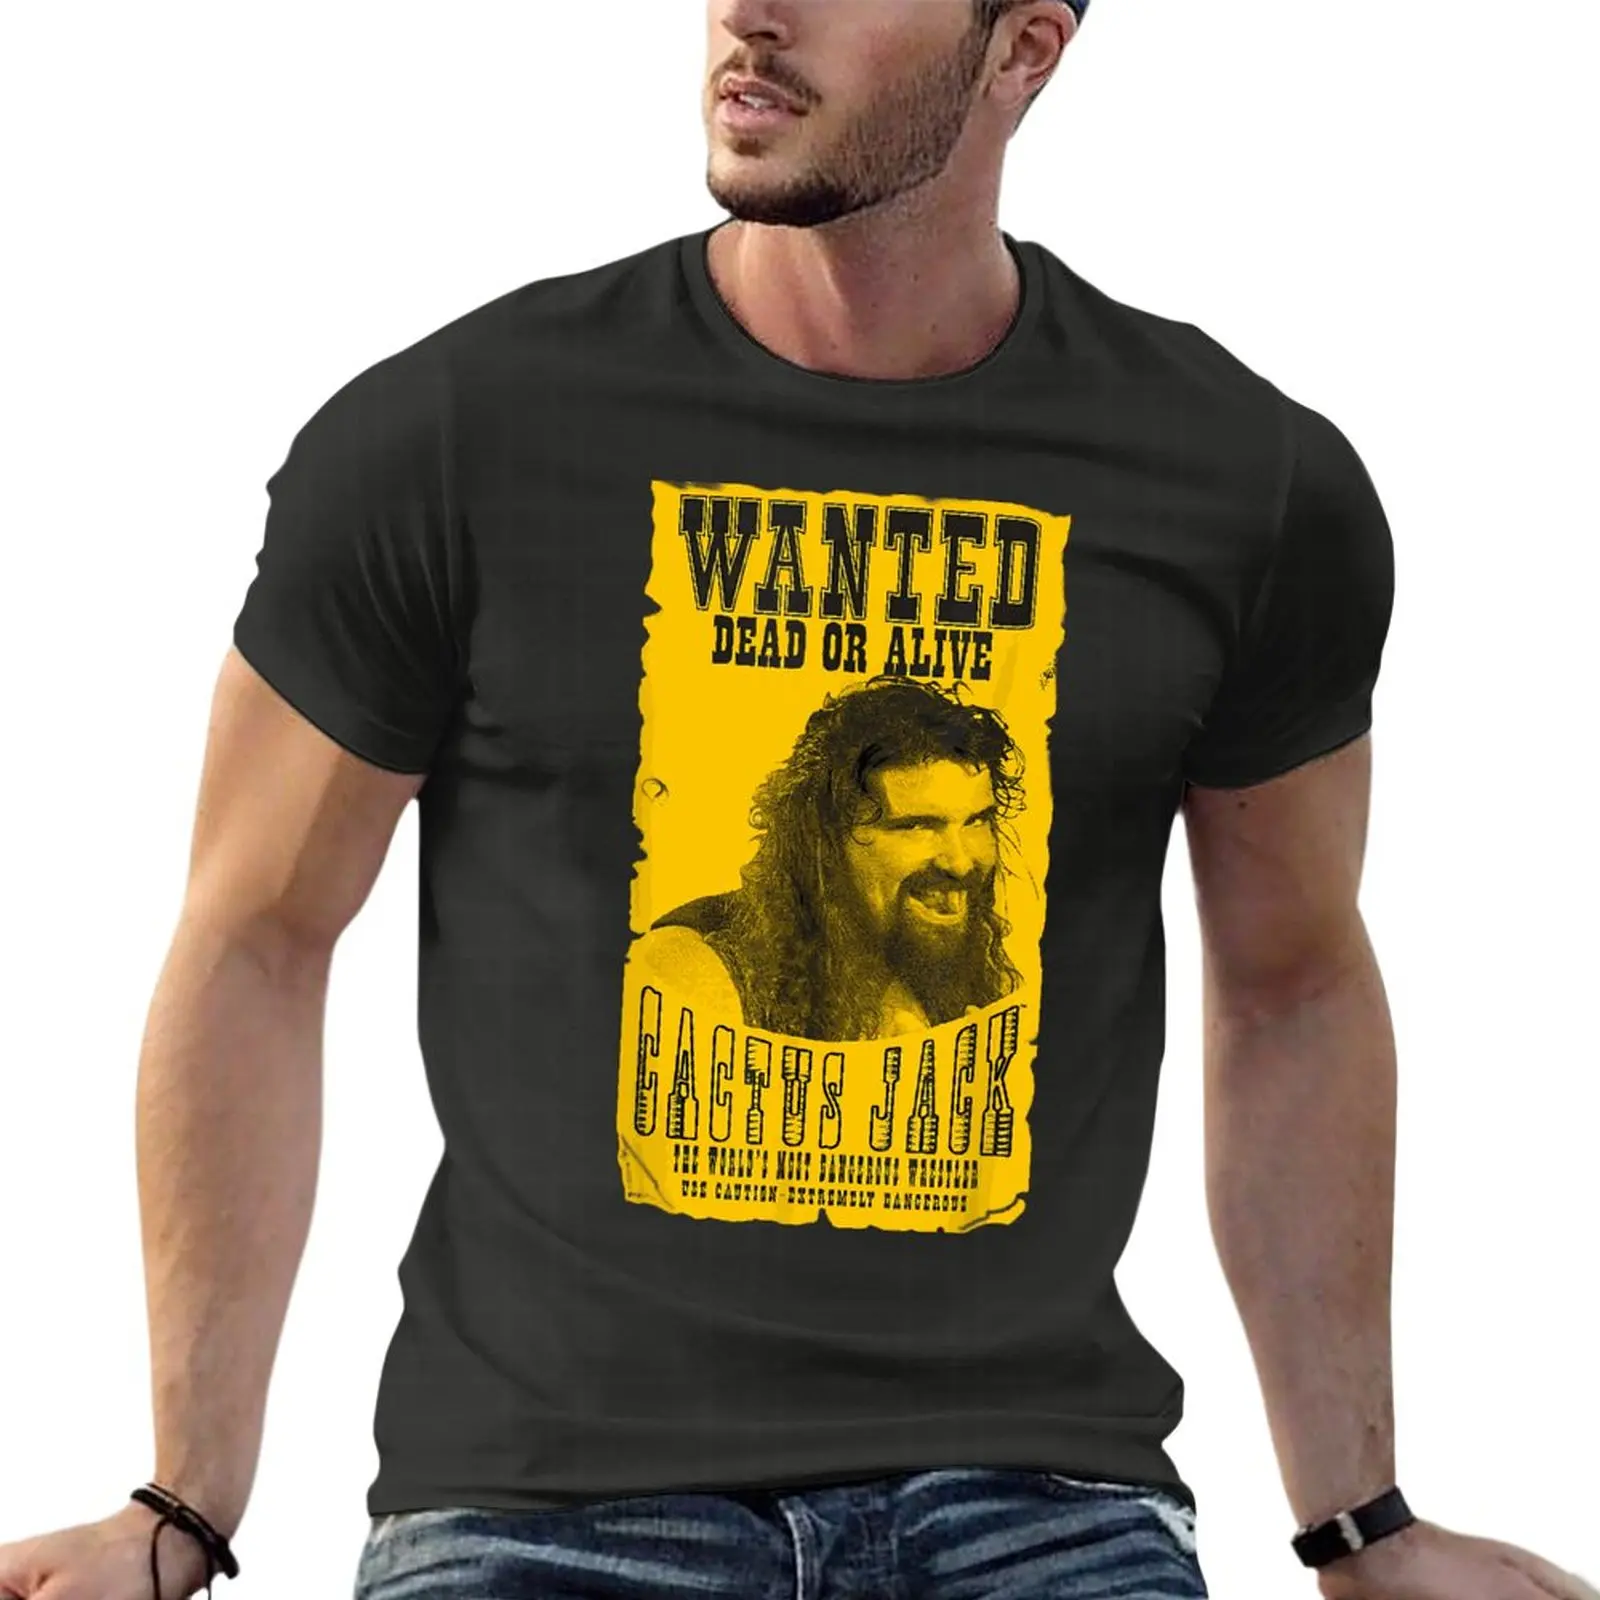 

Cactus Jack Wanted Dead Or Alive Mankind Mick Foley Oversized T-Shirts For Mens Clothing Short Sleeve Streetwear Plus Size Tops